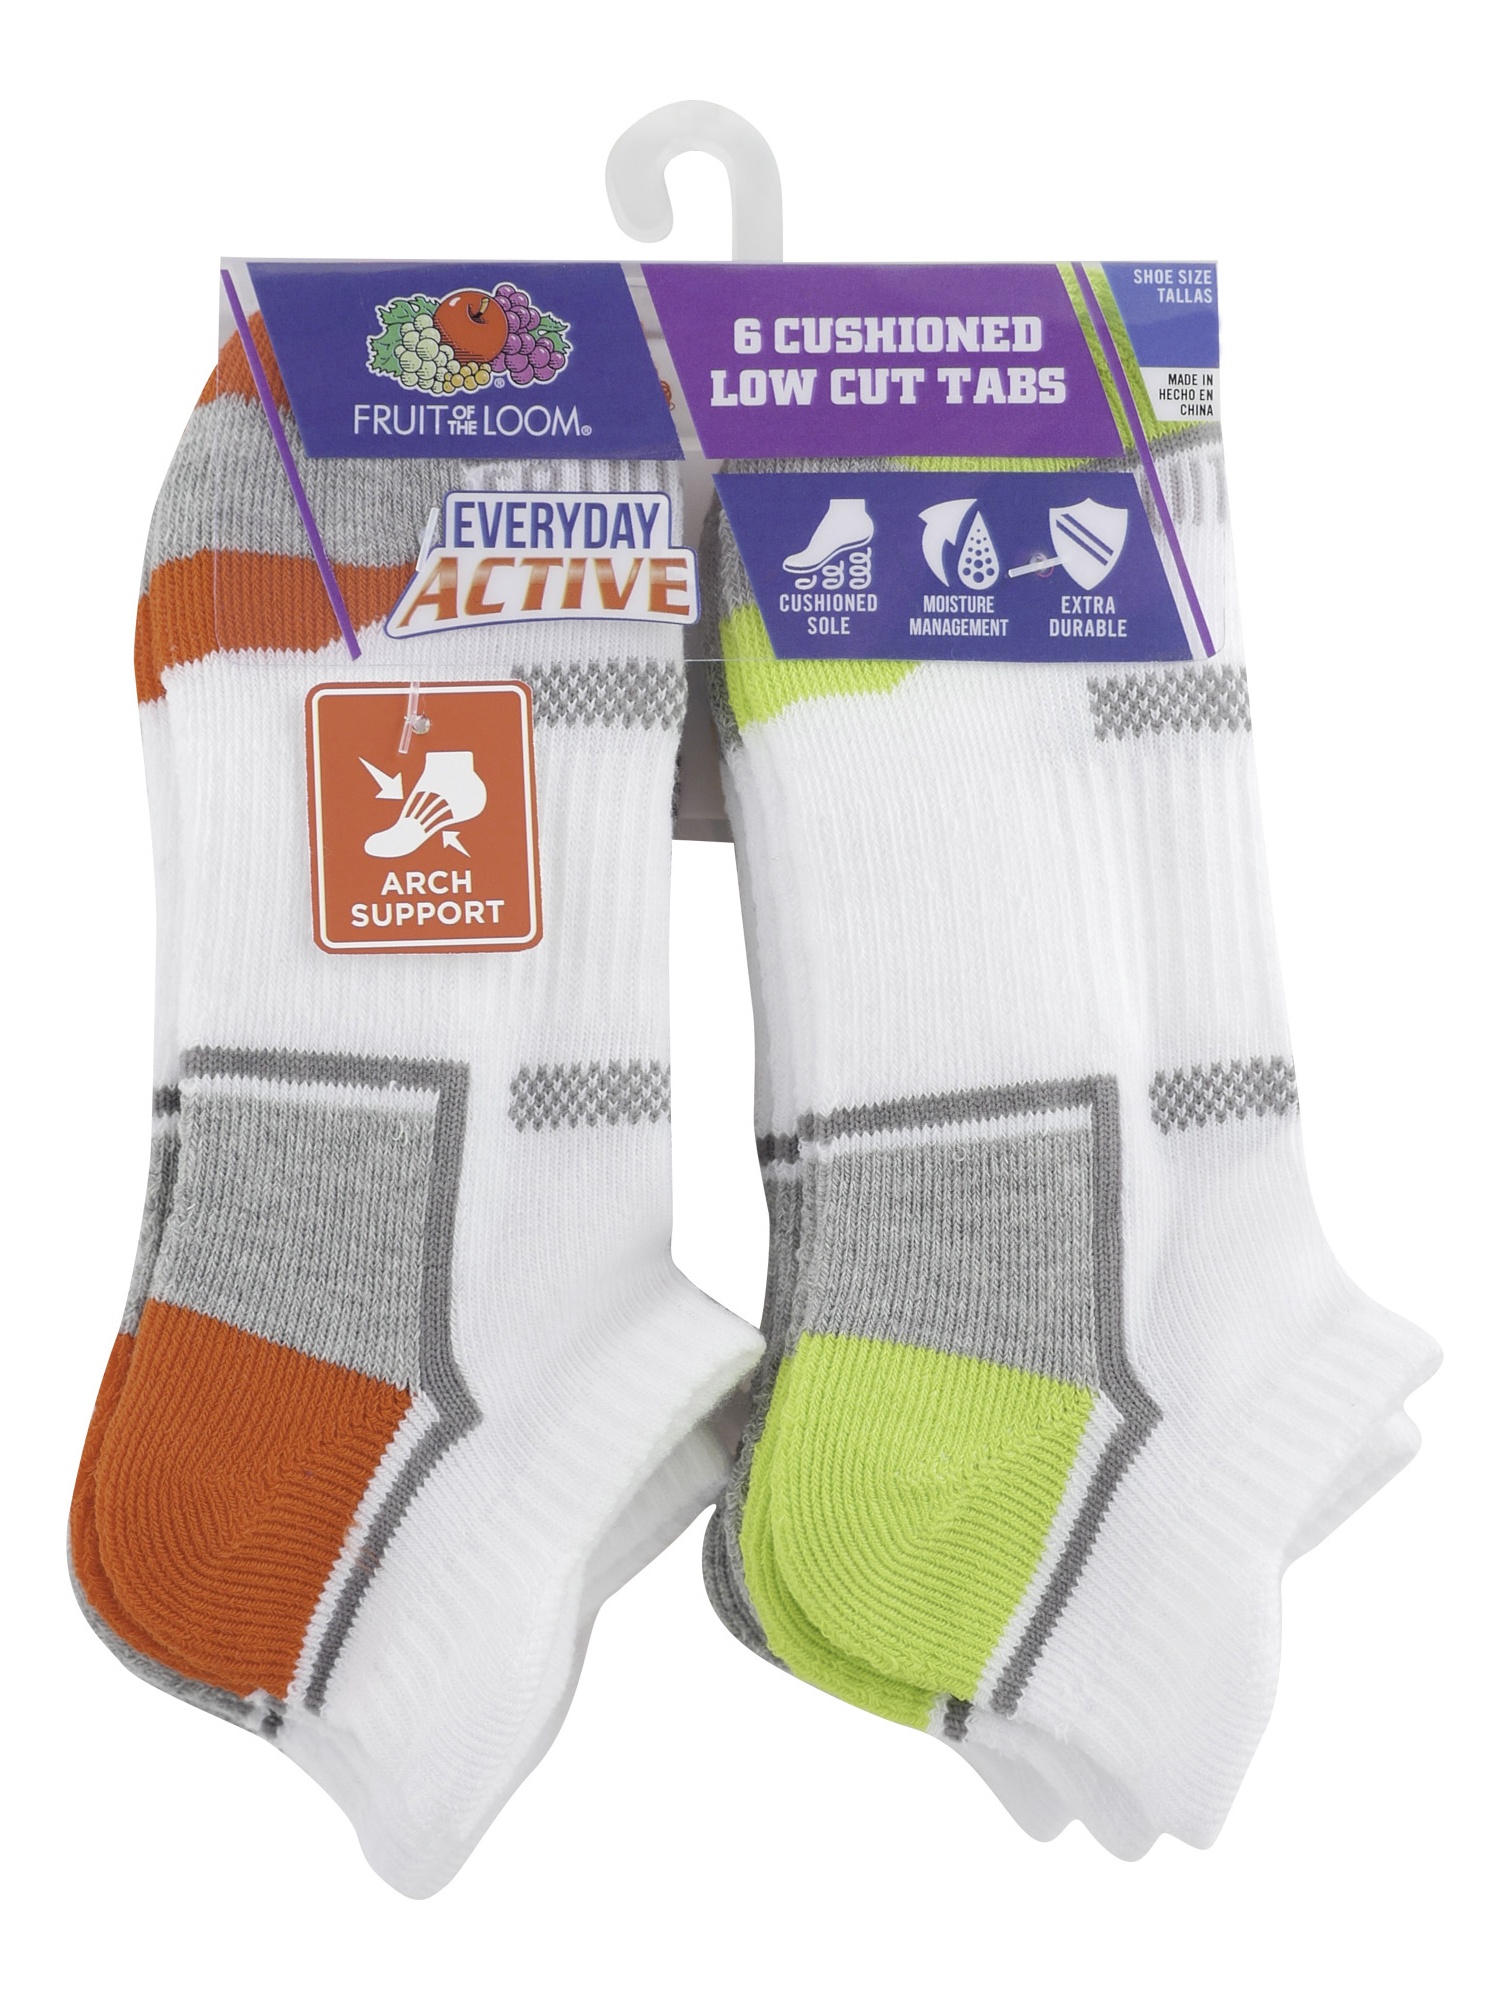 Fruit of the Loom Boys Socks, 6 Pack Low Cut Active Everyday Cushioned (Little Boys & Big Boys) - image 3 of 3